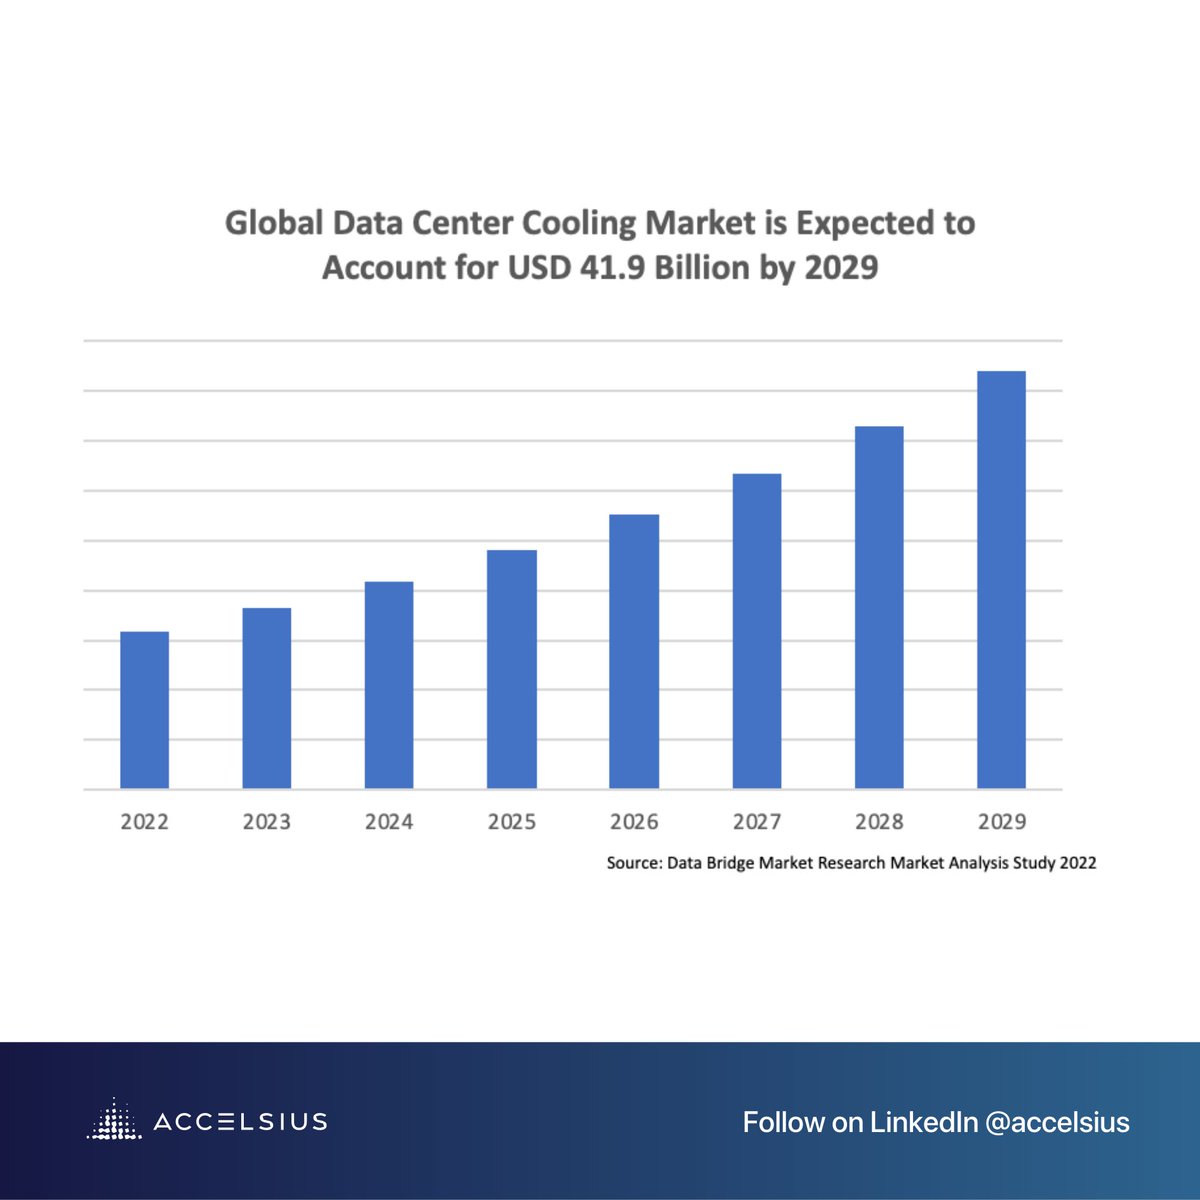 The transition to liquid cooling continues to accelerate, driven by AI adoption. @Accelsius1 

#ai #liquidcooling #datacenters #datacentercooling